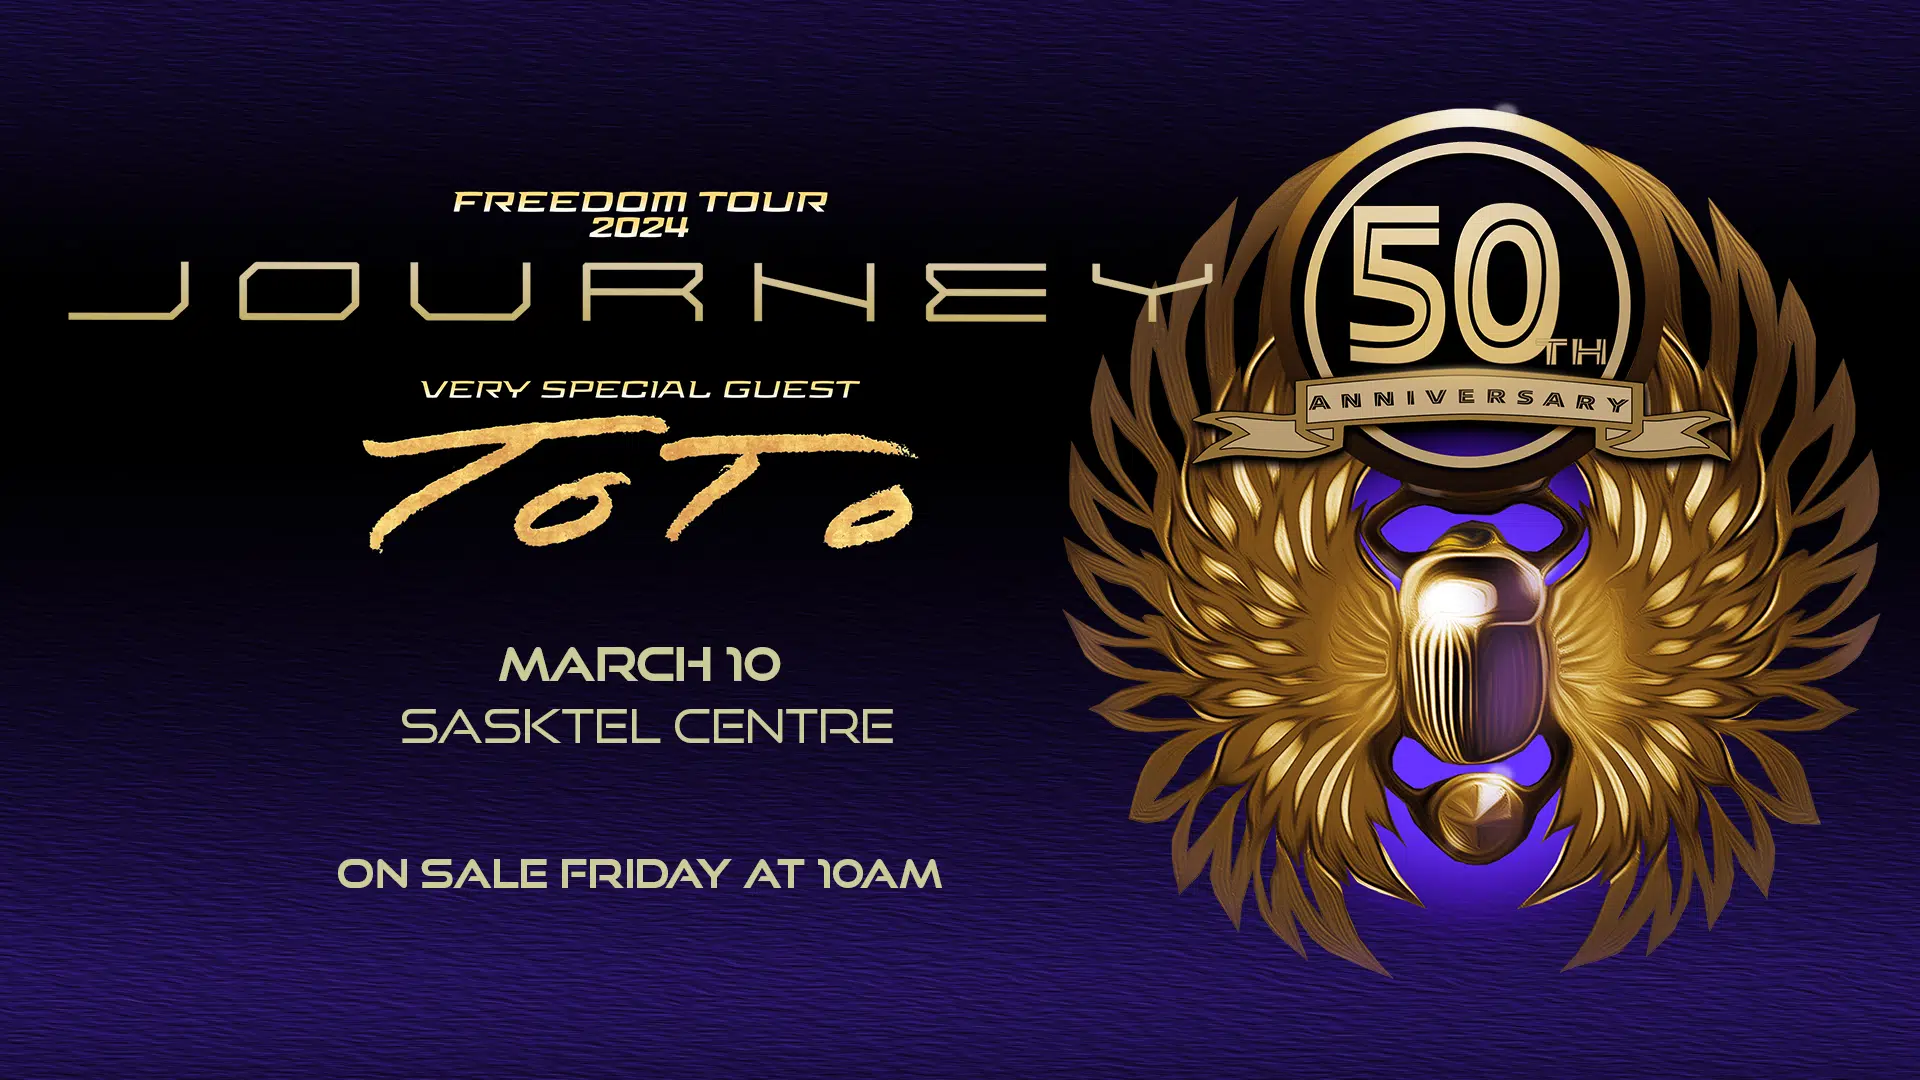 Journey’s Freedom Tour 2024 is coming to SaskTel Centre 900 CKBI